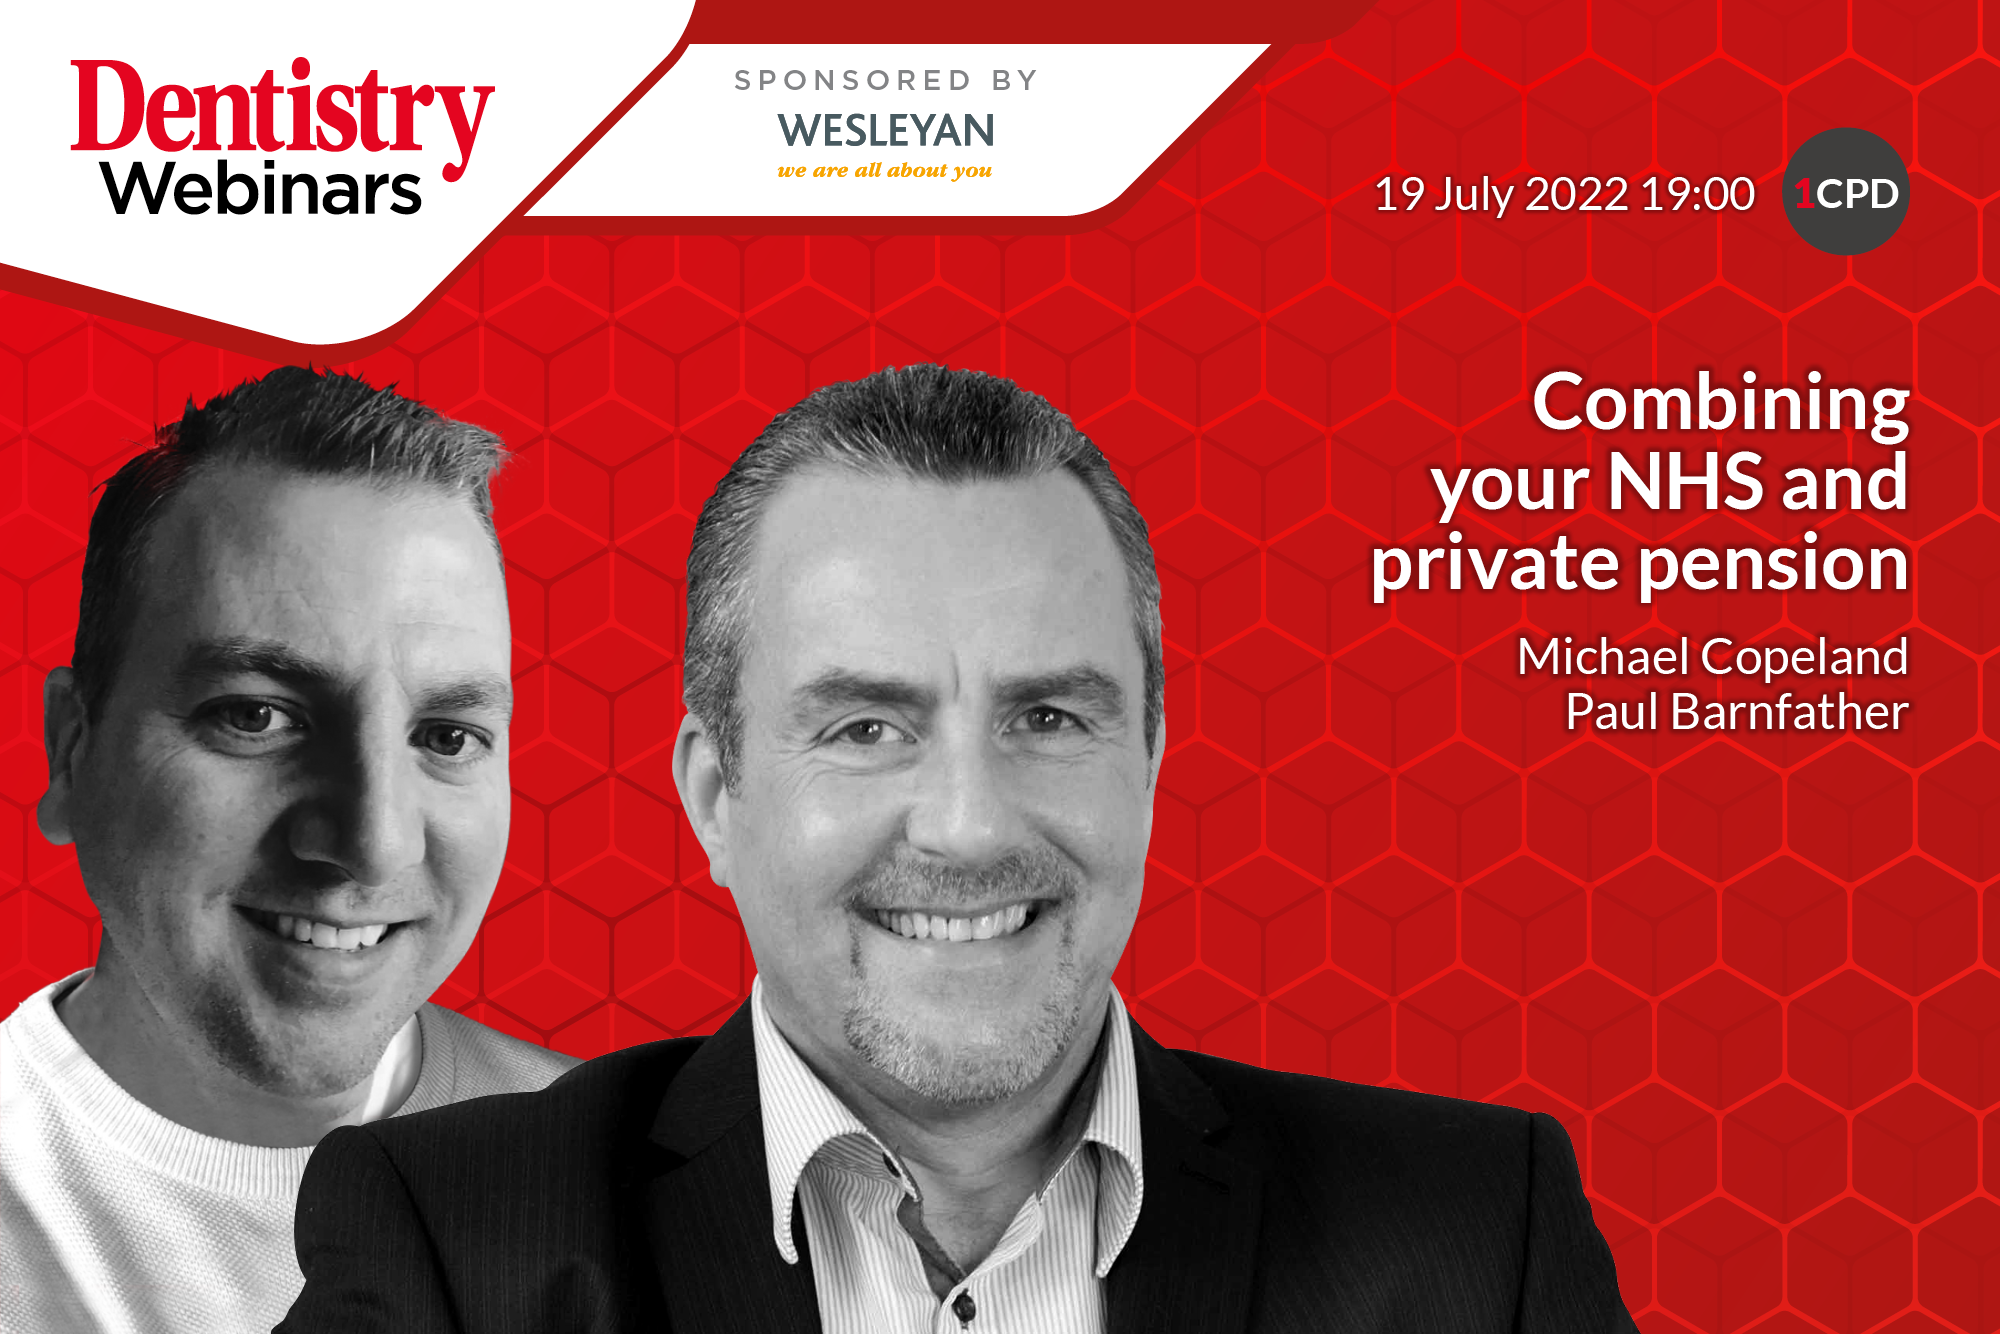 Join host Michael Copeland and panellist Paul Barnfather as they discuss combining your NHS and private pension on 19 July 2022 at 7pm.